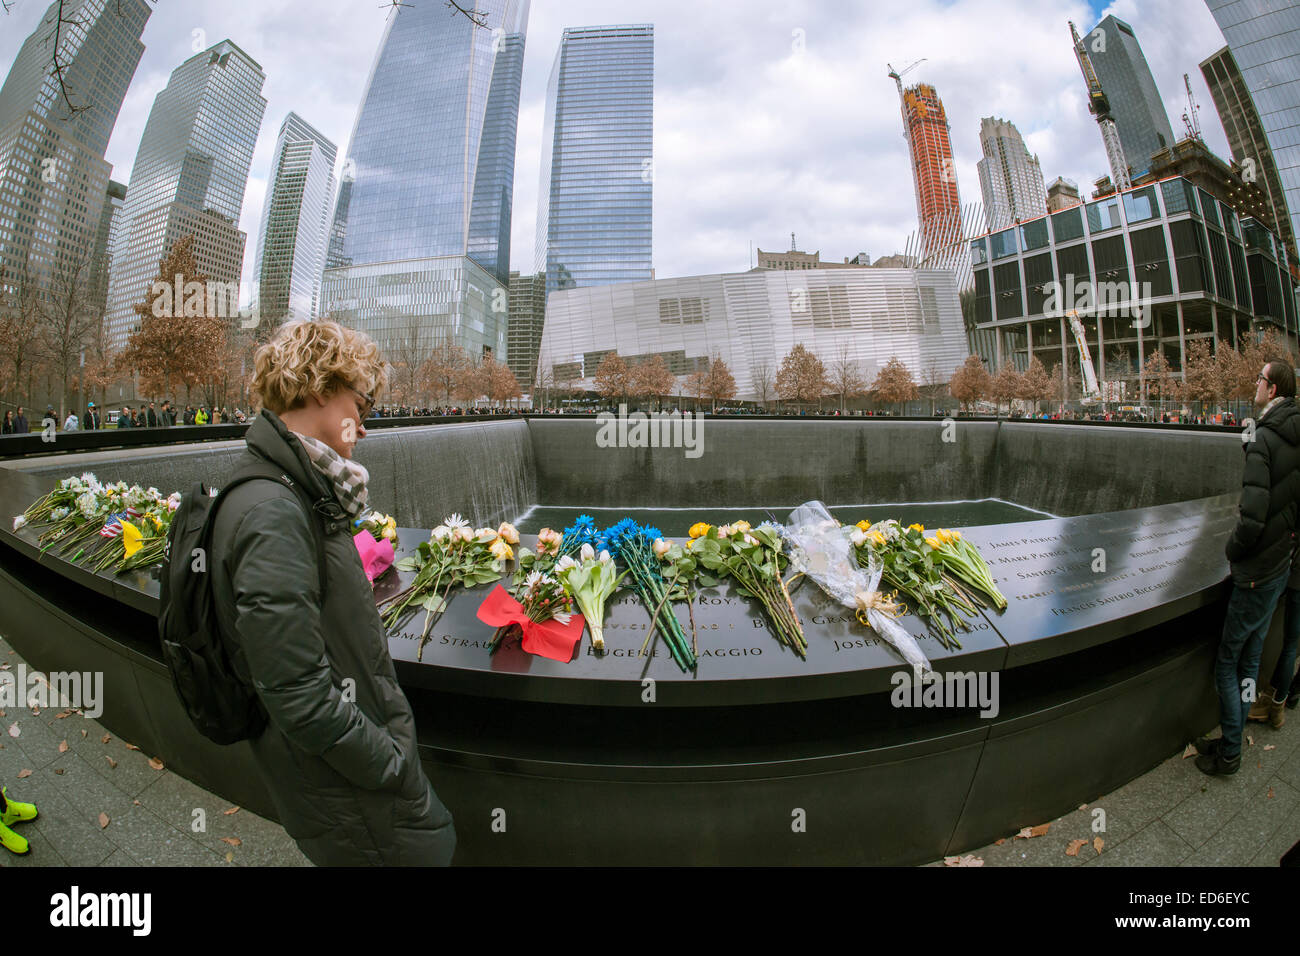 Visitors to the National September 11 Memorial & Museum in New York on Christmas, Thursday, December 25, 2014. The memorial consists of twin memorial pools on the footprints of the World Trade Center and a plaza planted with more than 400 swamp white oak trees. The names of the 2983 victims of 9/11 and the February 1993 WTC attack are inscribed around the base of the pools. (© Richard B. Levine) Stock Photo